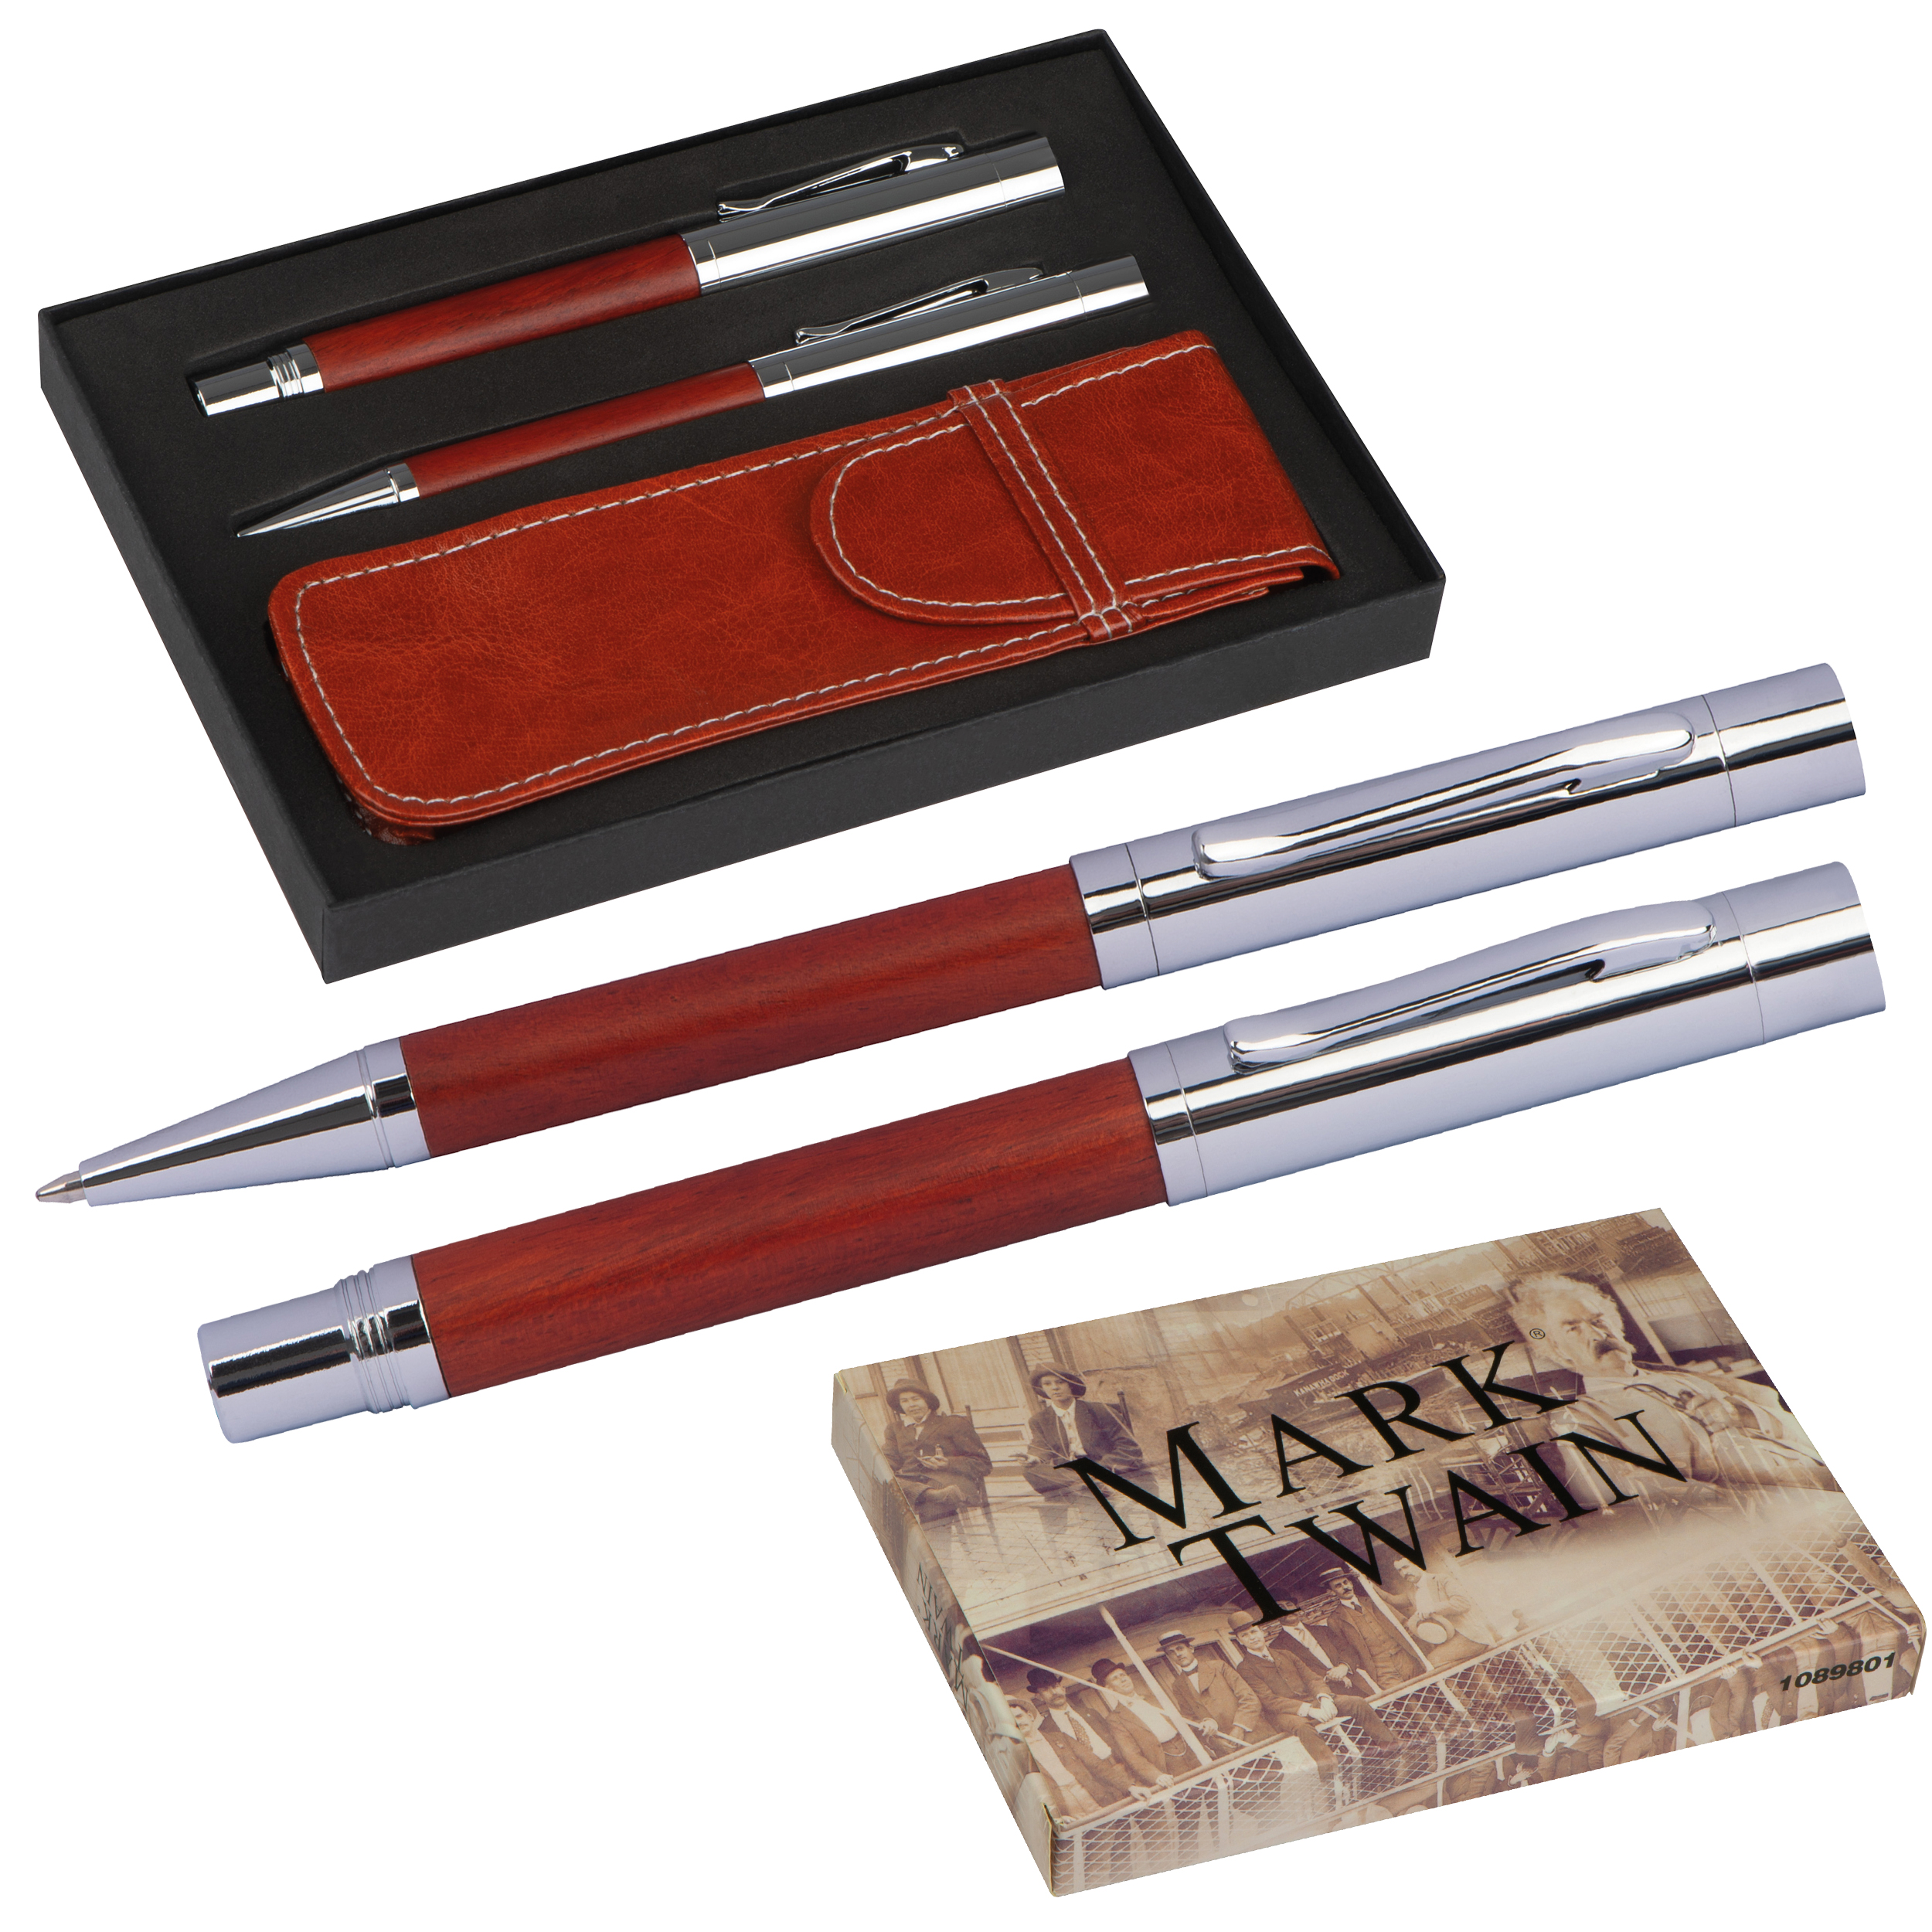 Mark Twain Writing Set - Chipping Campden - Sleaford